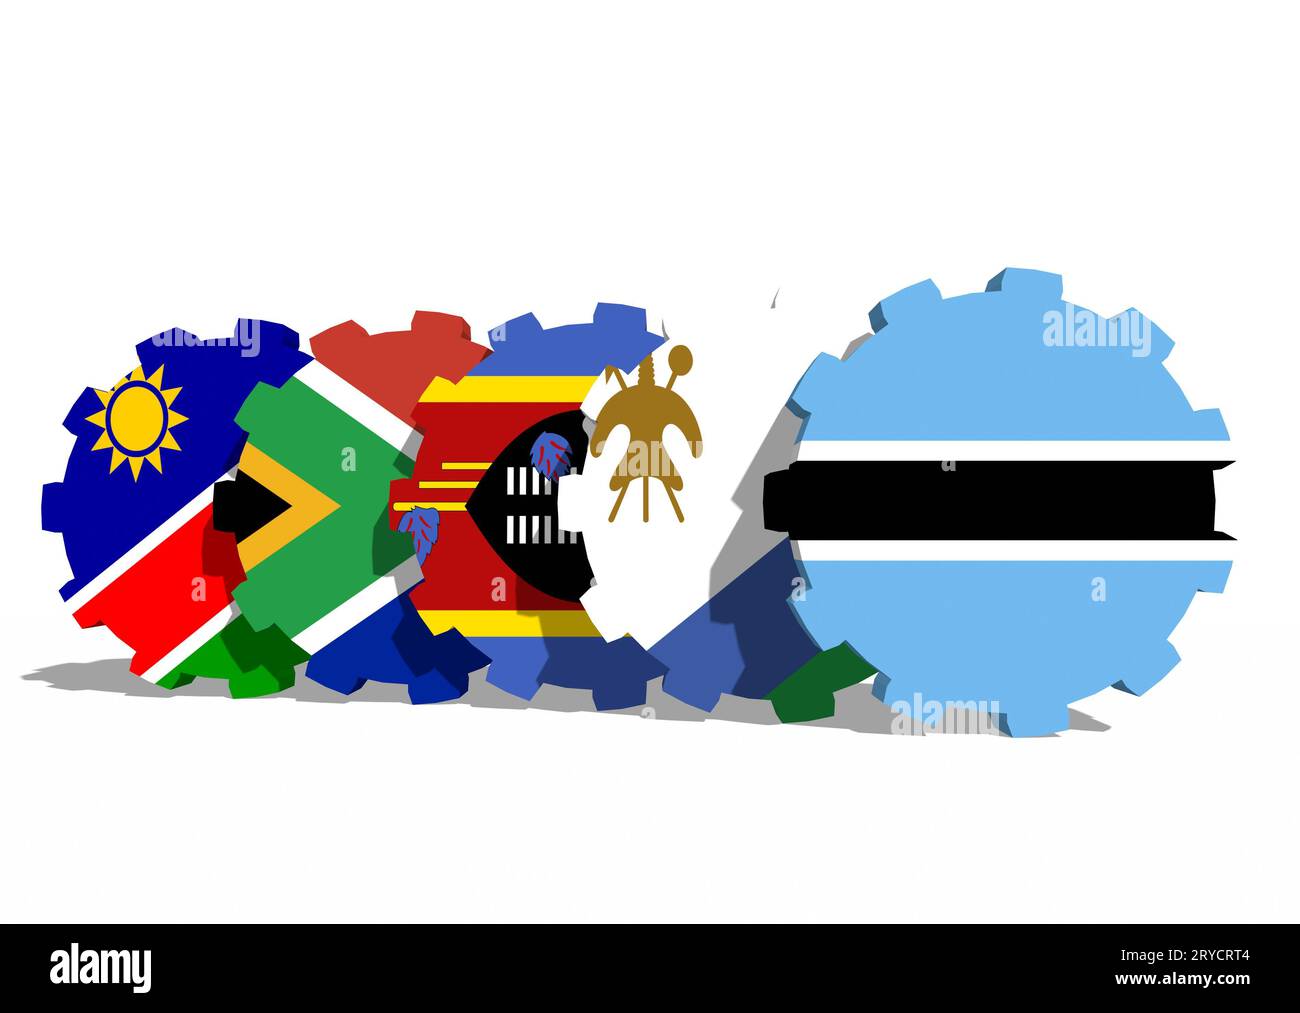 Southern African Customs Union members national flags Stock Photo